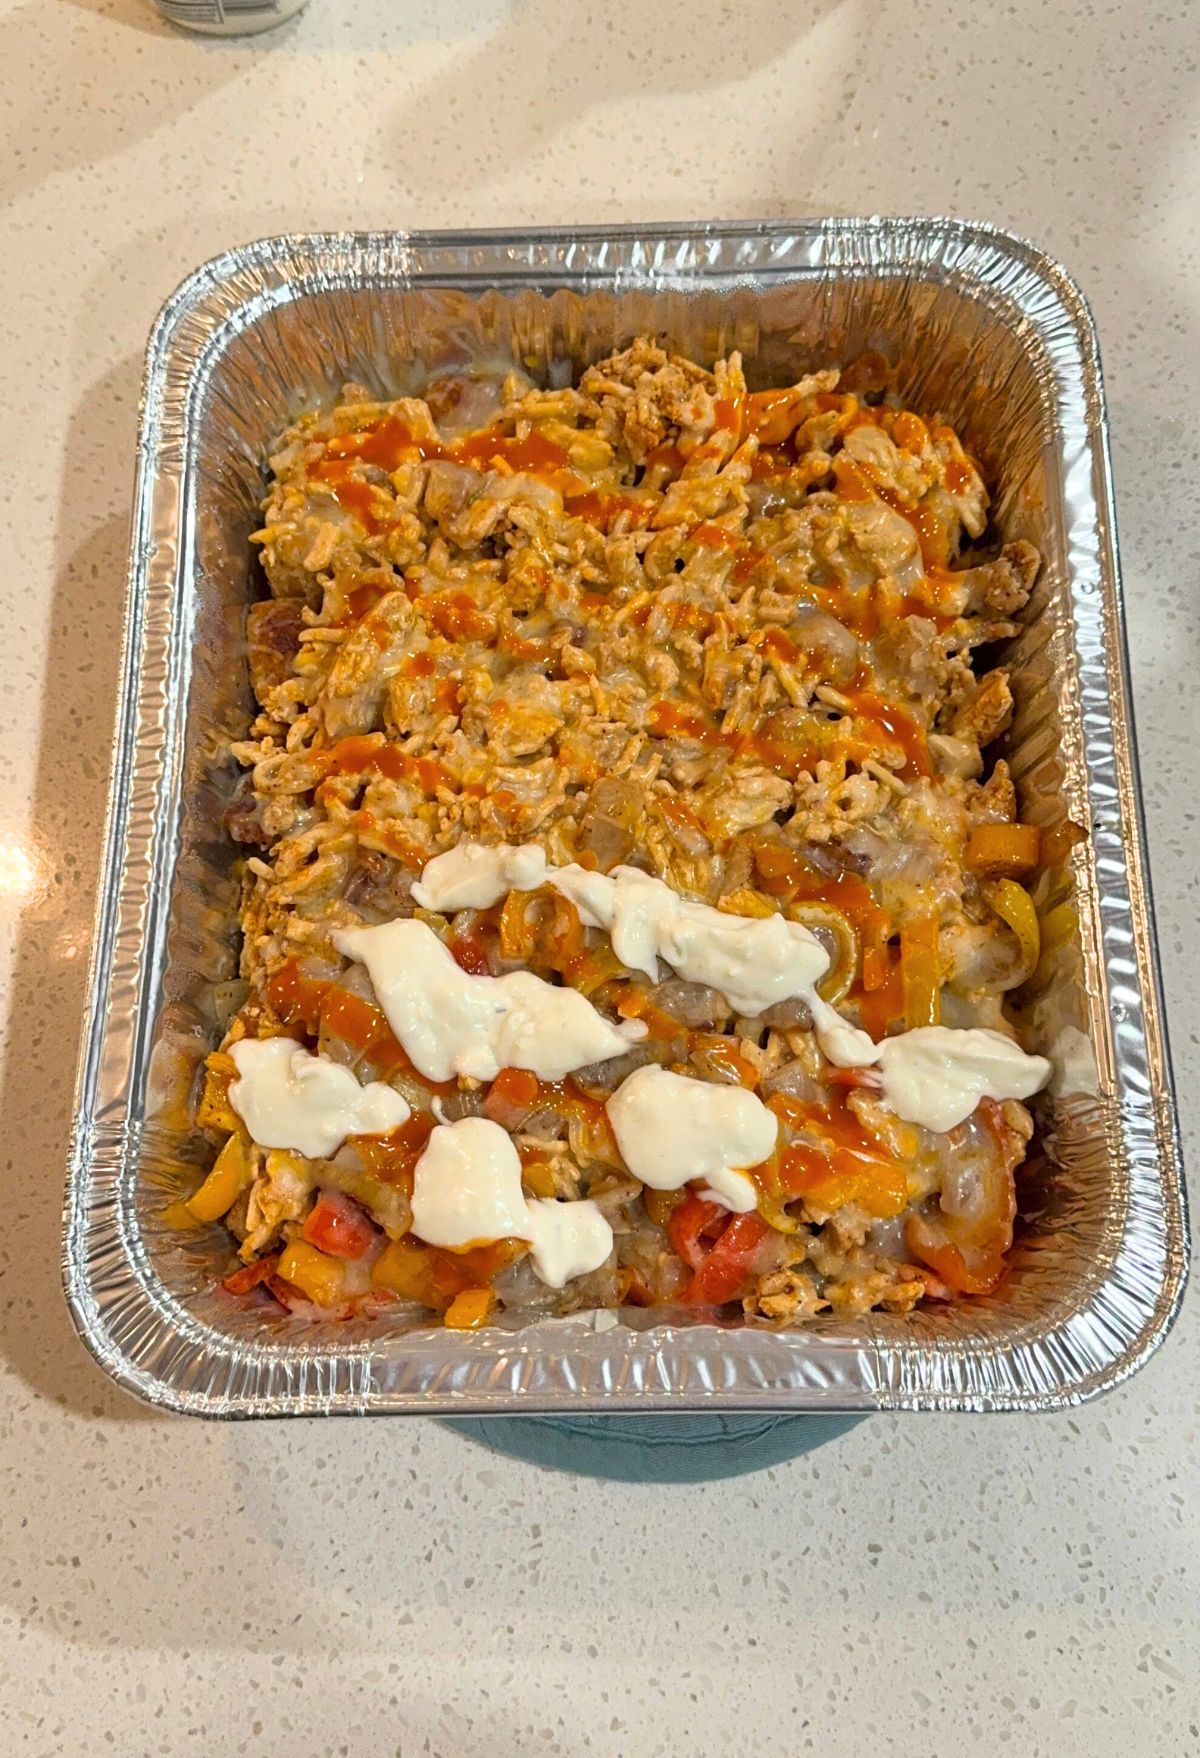 Aluminum tray containing a baked pasta dish with tomato chunks, melted cheese, and dollops of white sauce on top.